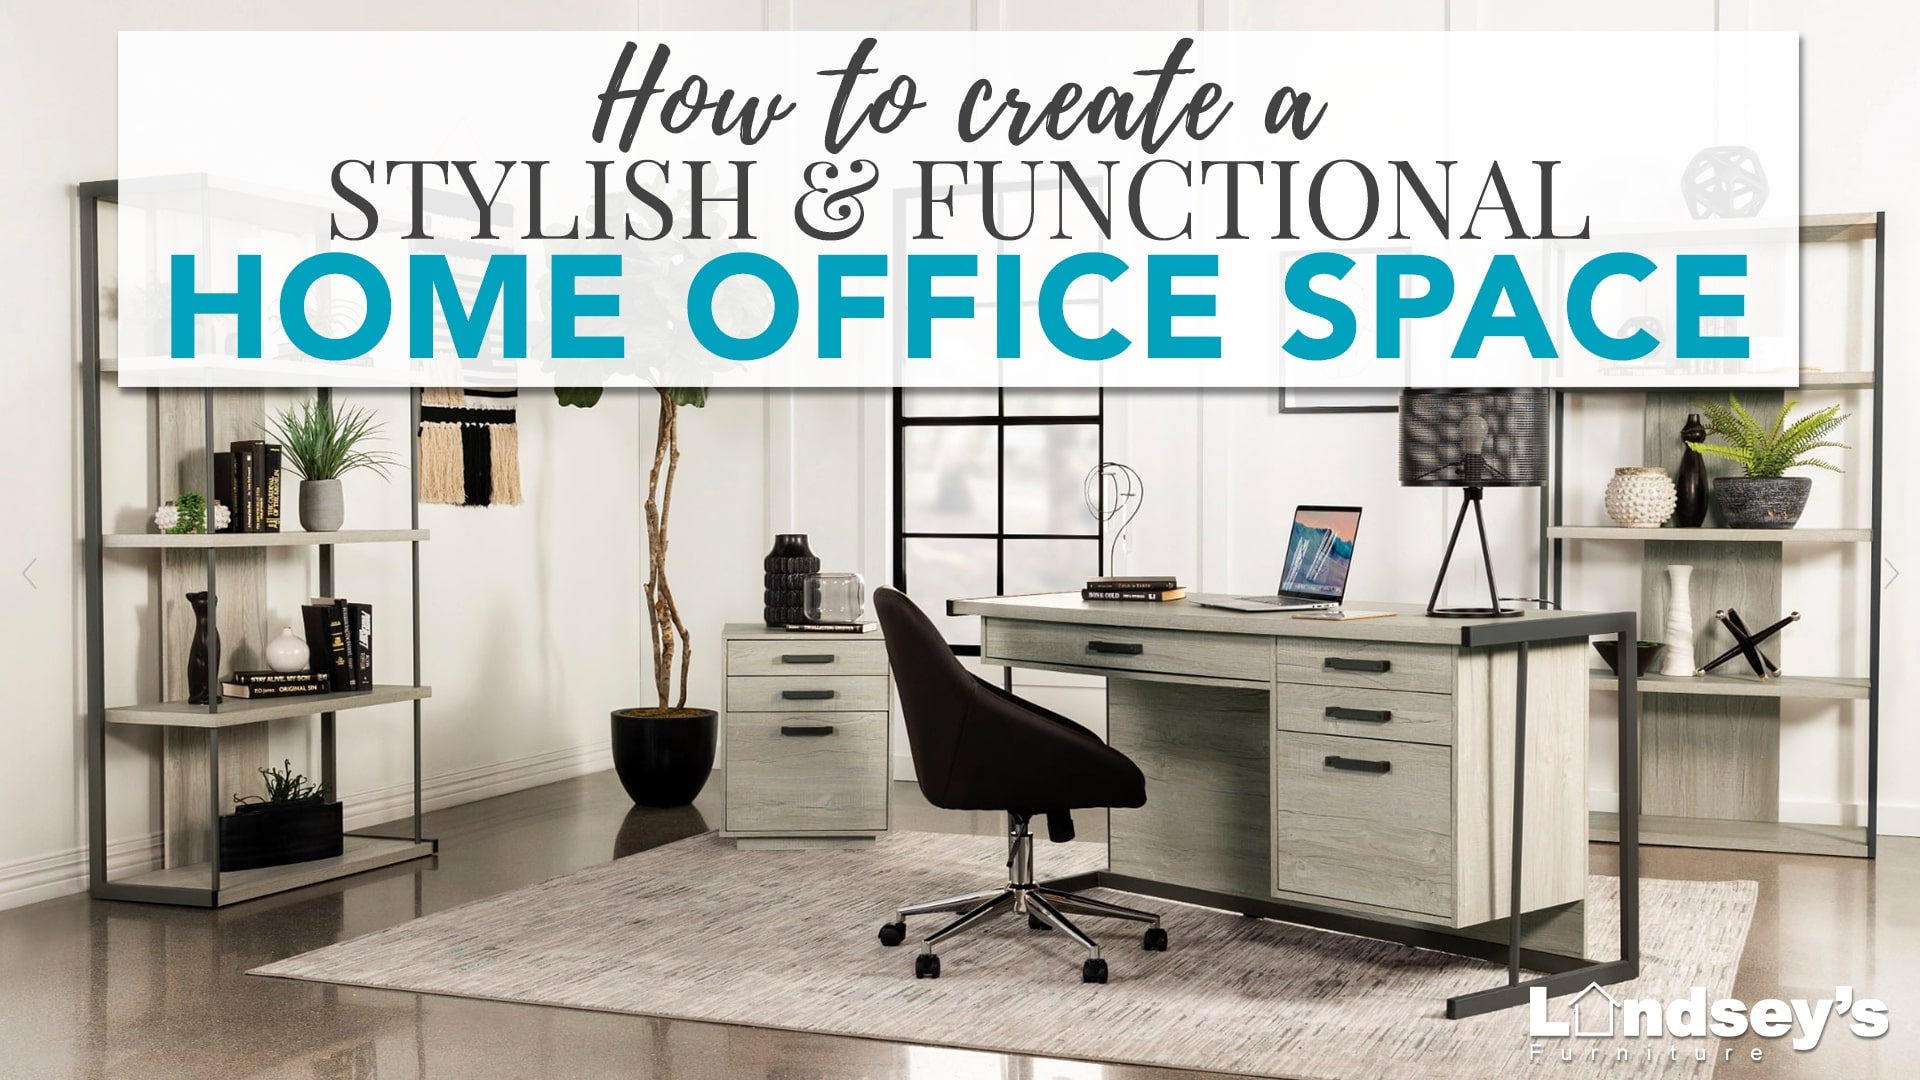 How to Create a Stylish and Functional Home Office Space